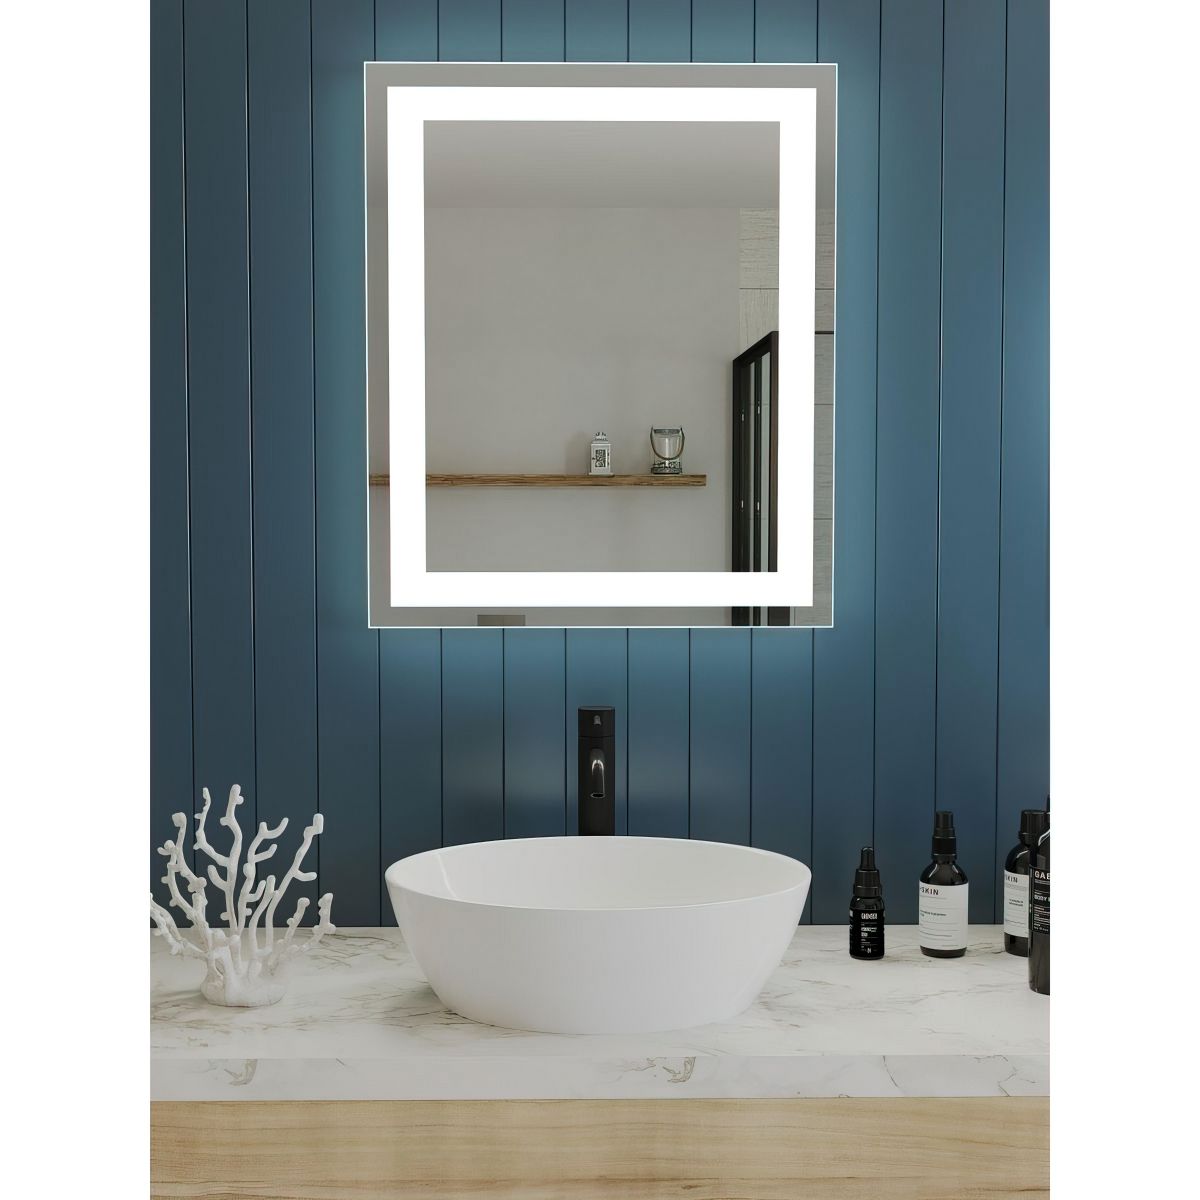 Captarent 30 In. X 36 In. White LED Wall Mirror - Bees Lighting